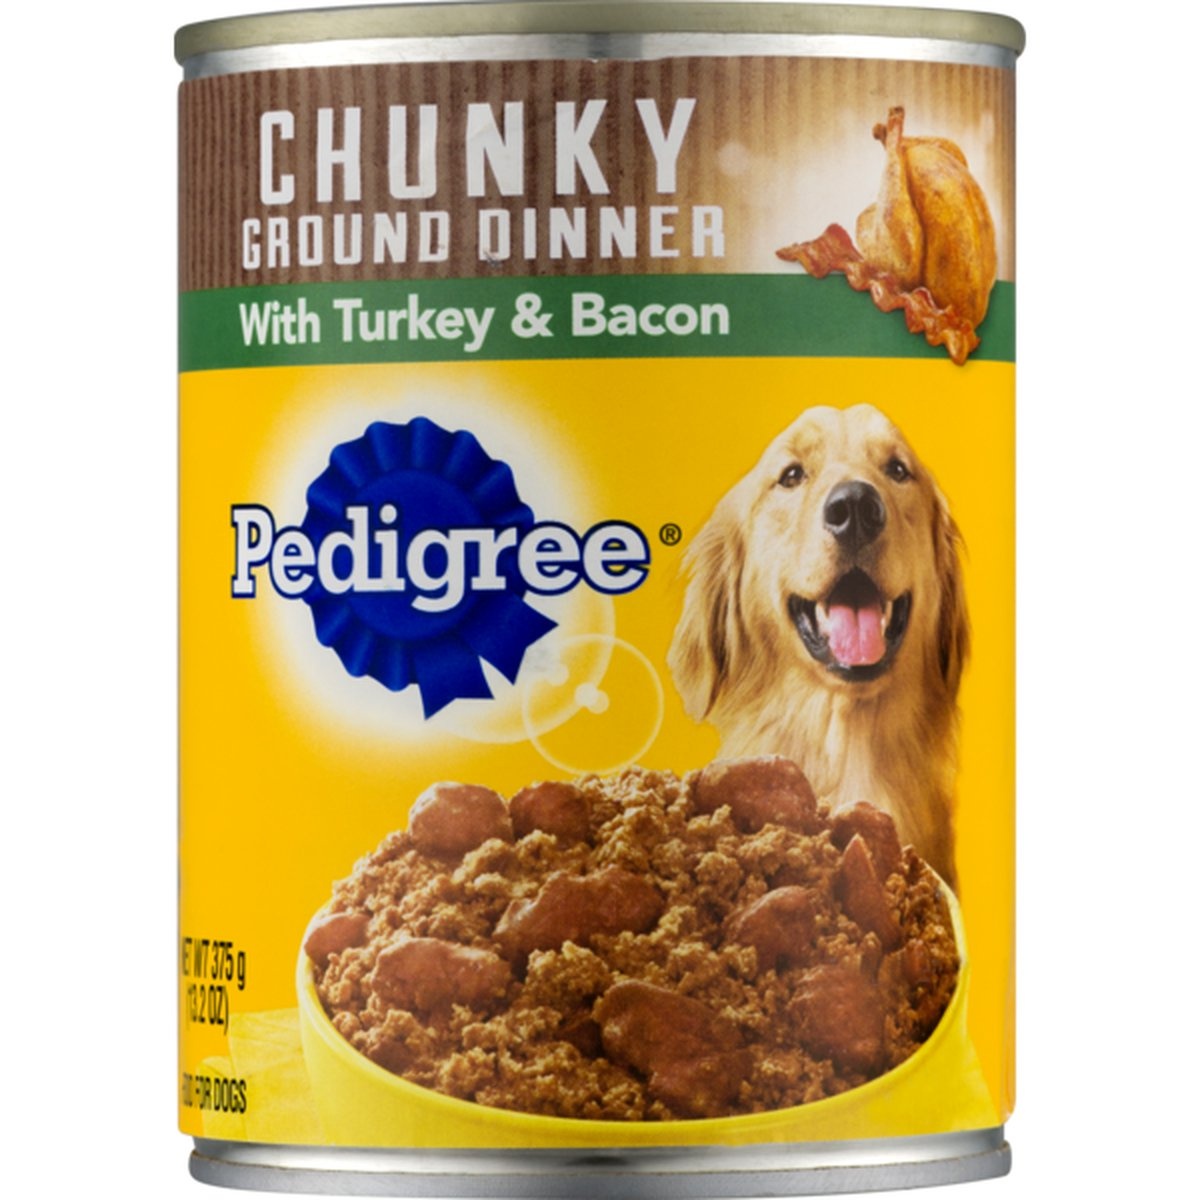 slide 1 of 1, Pedigree Chunky Ground Dinner Food For Dogs With Turkey & Bacon, 13.2 oz